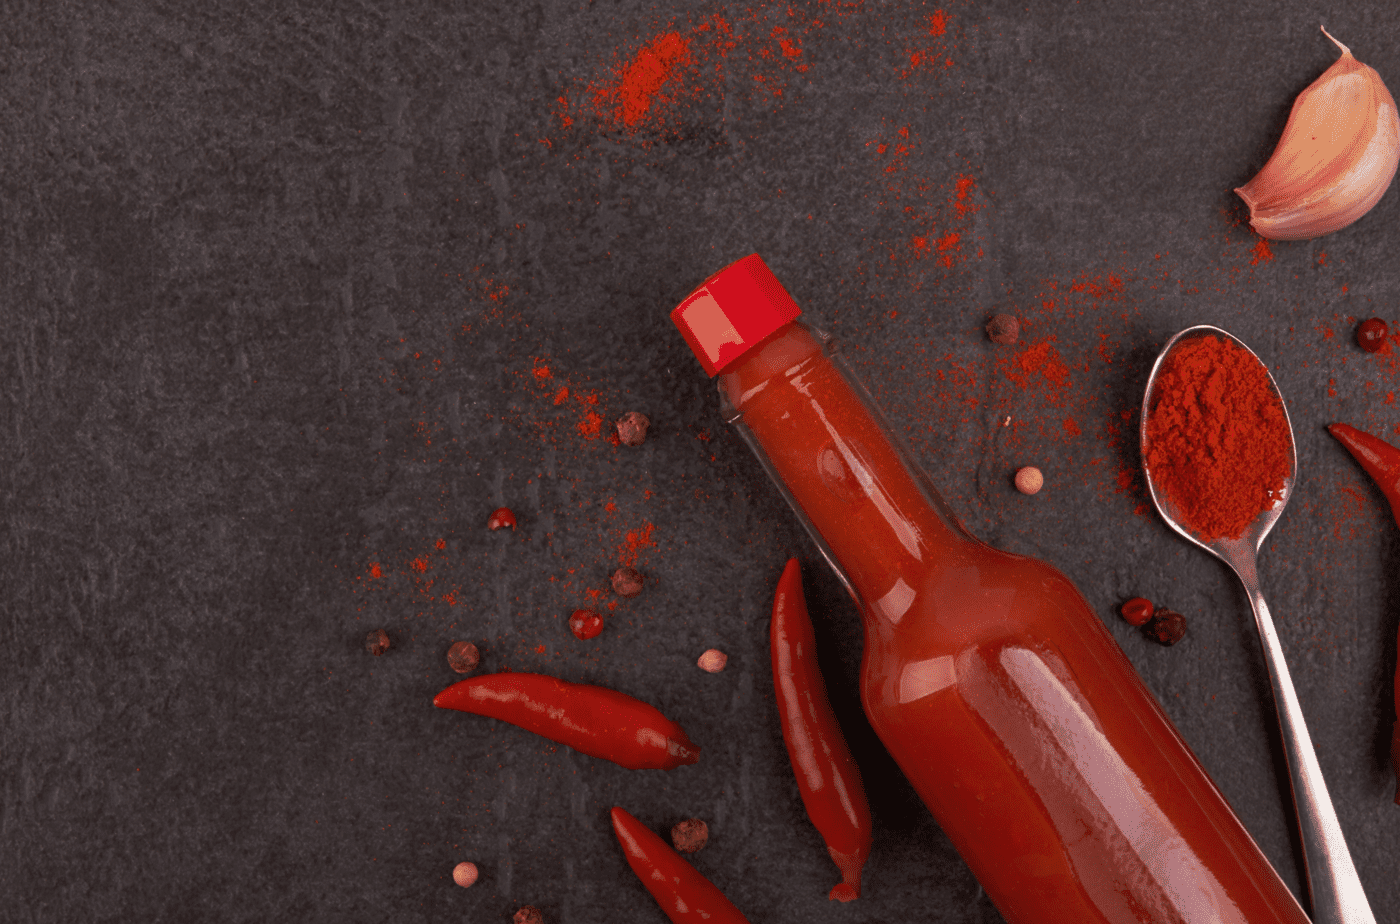 Spoilers without context glass onion hot sauce and chili powder lying on gray background